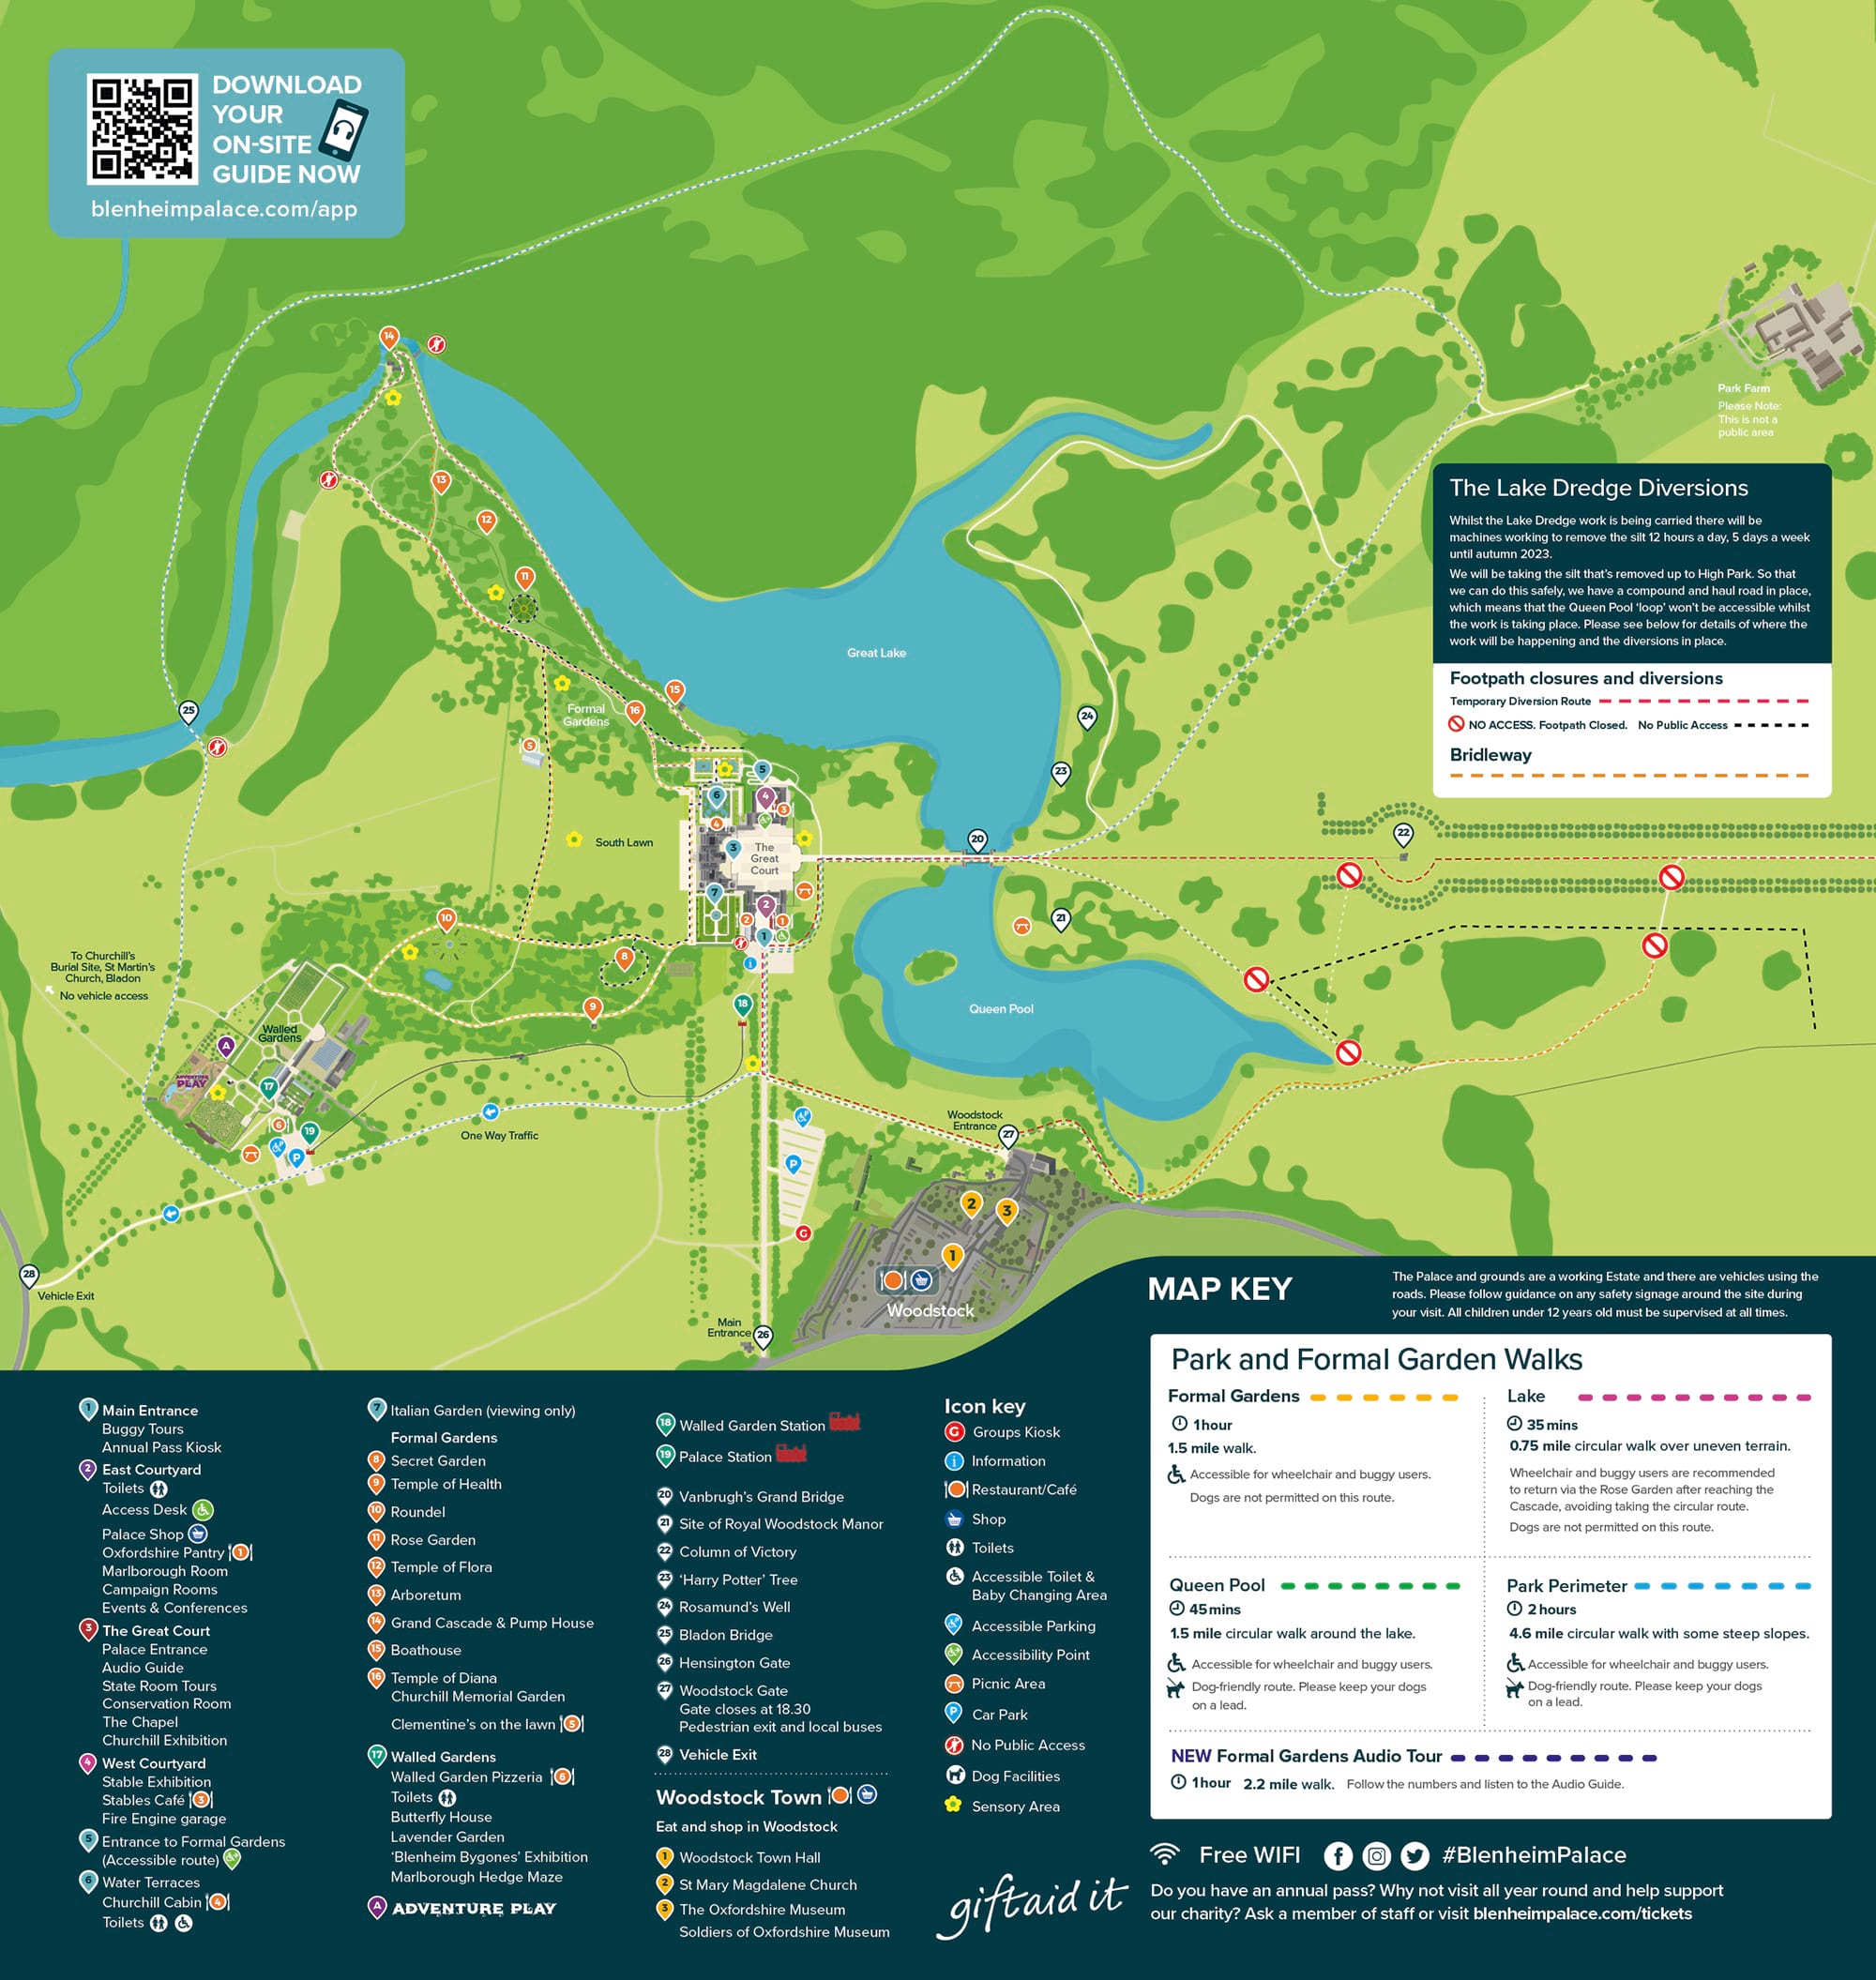 Map of Blenheim Palace and Grounds